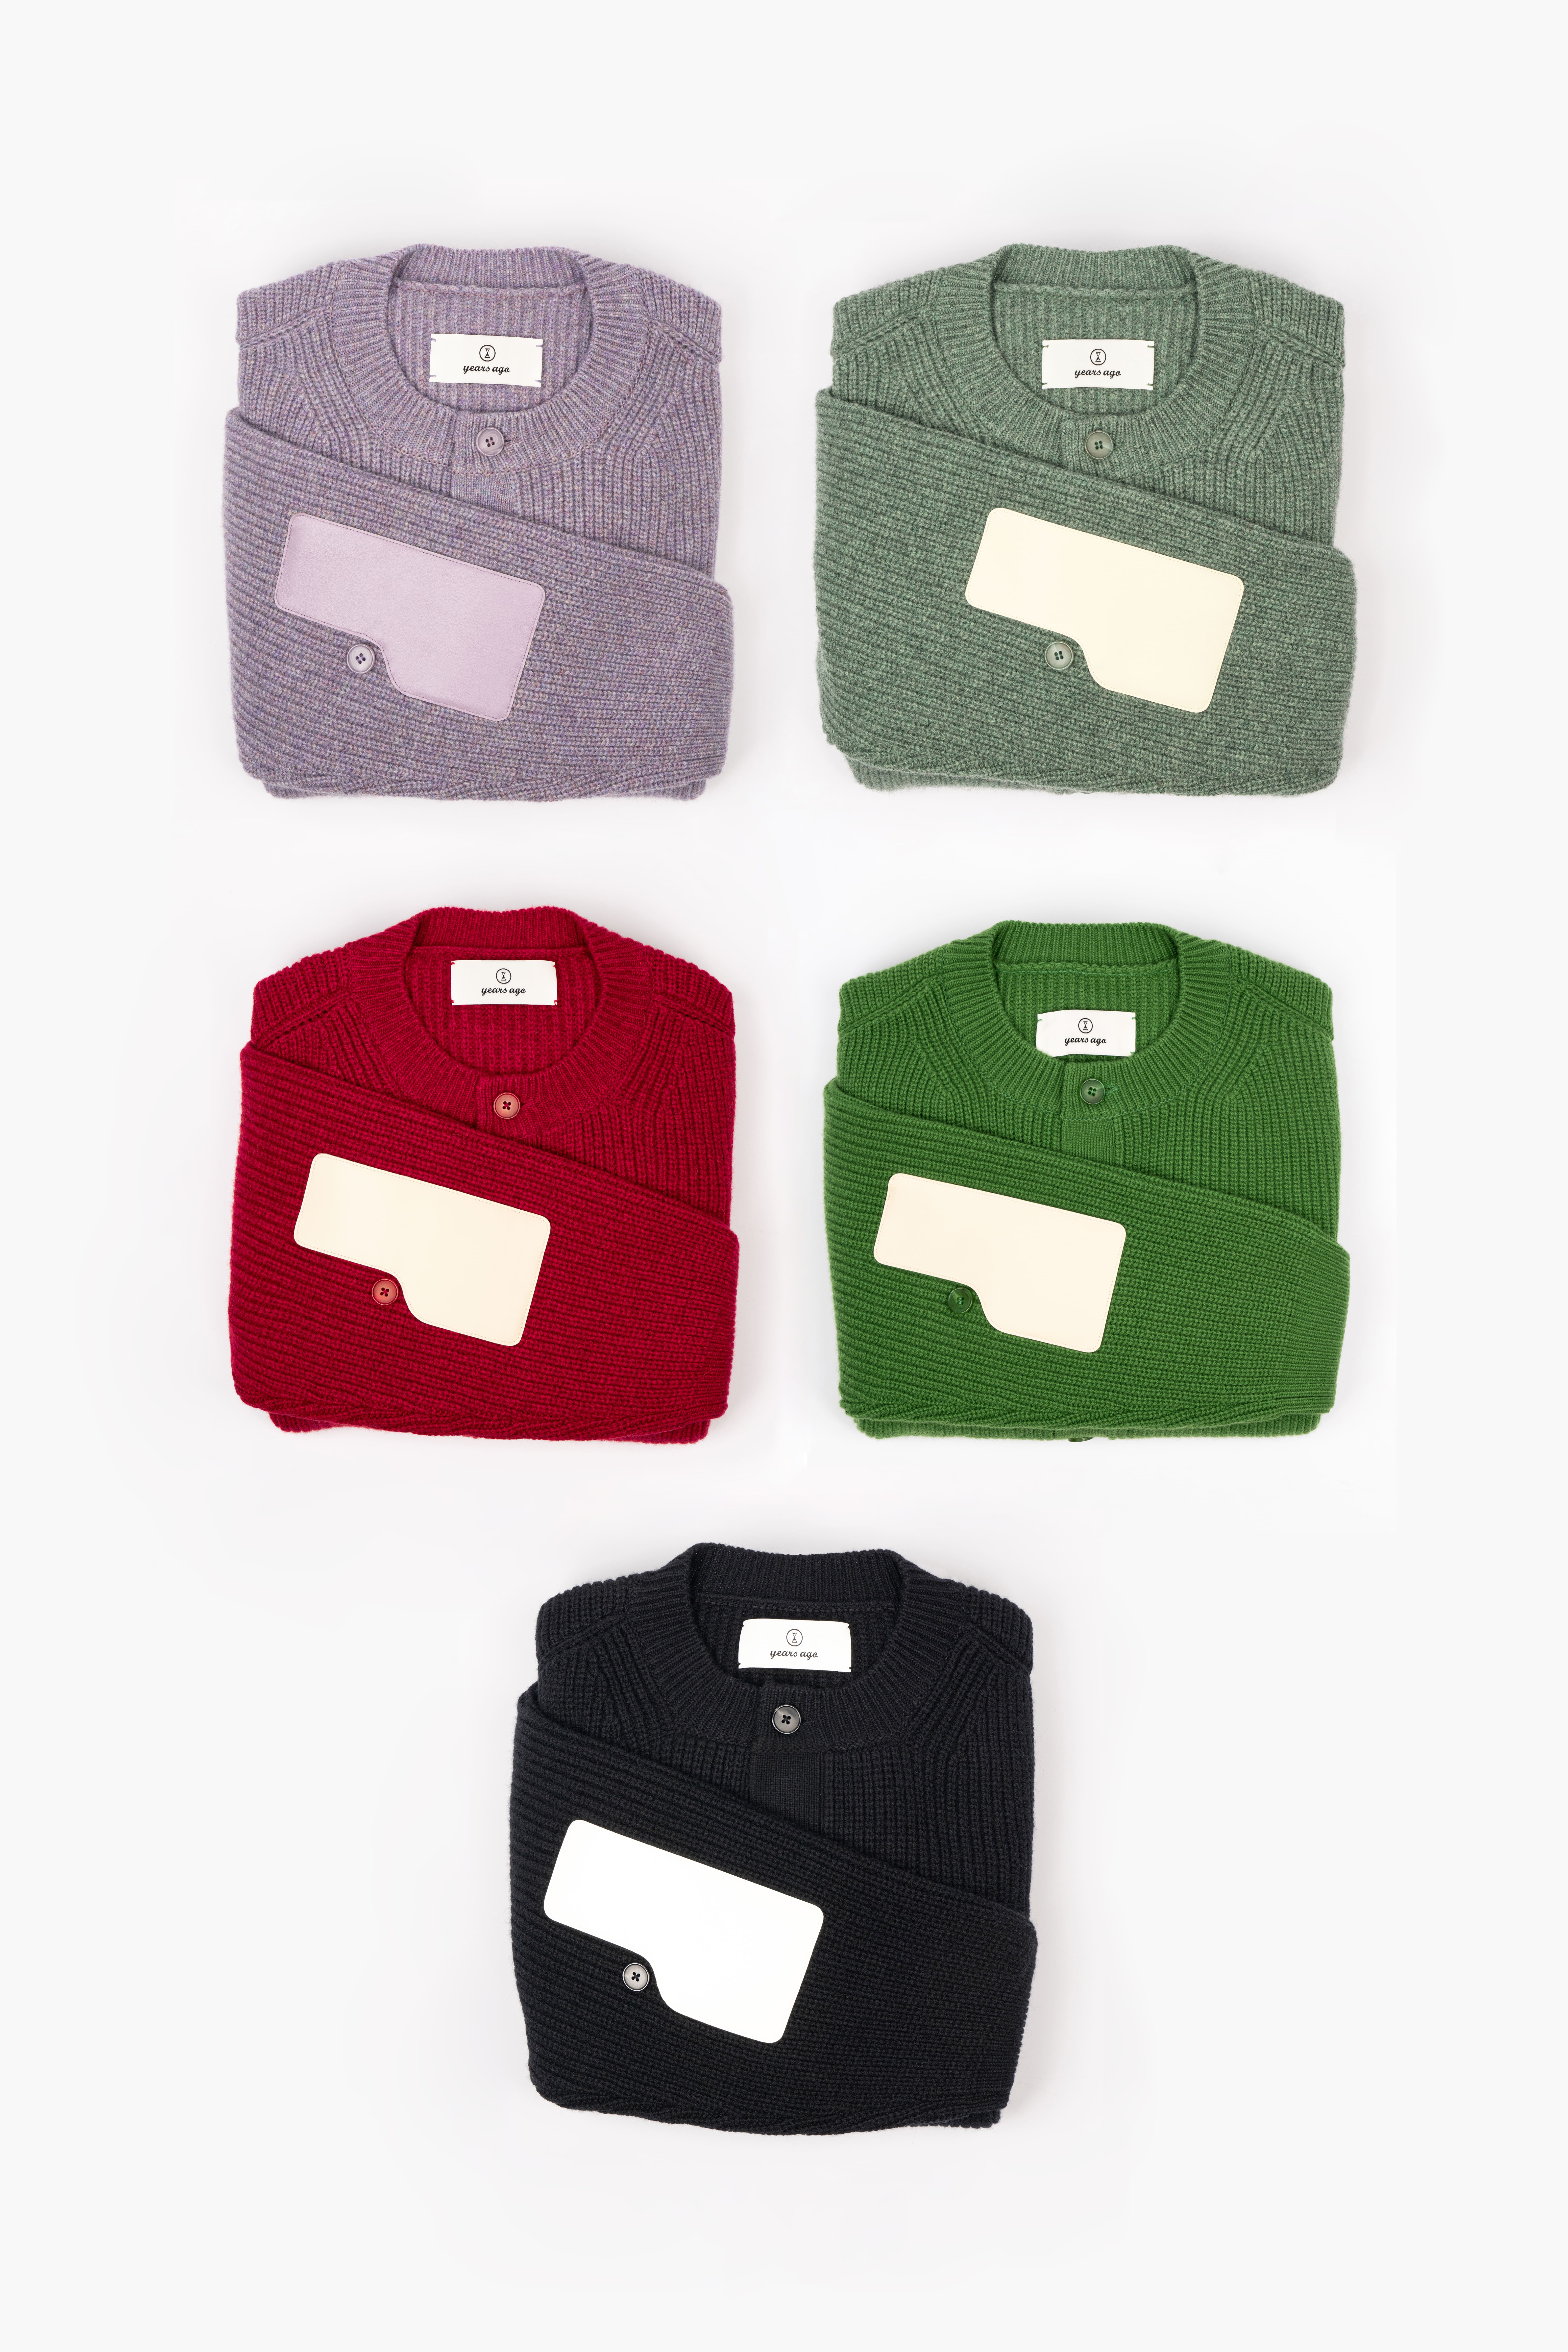 [KNIT PACK3] ROVER WOOL KNIT JACKET 02 (5 Colors)